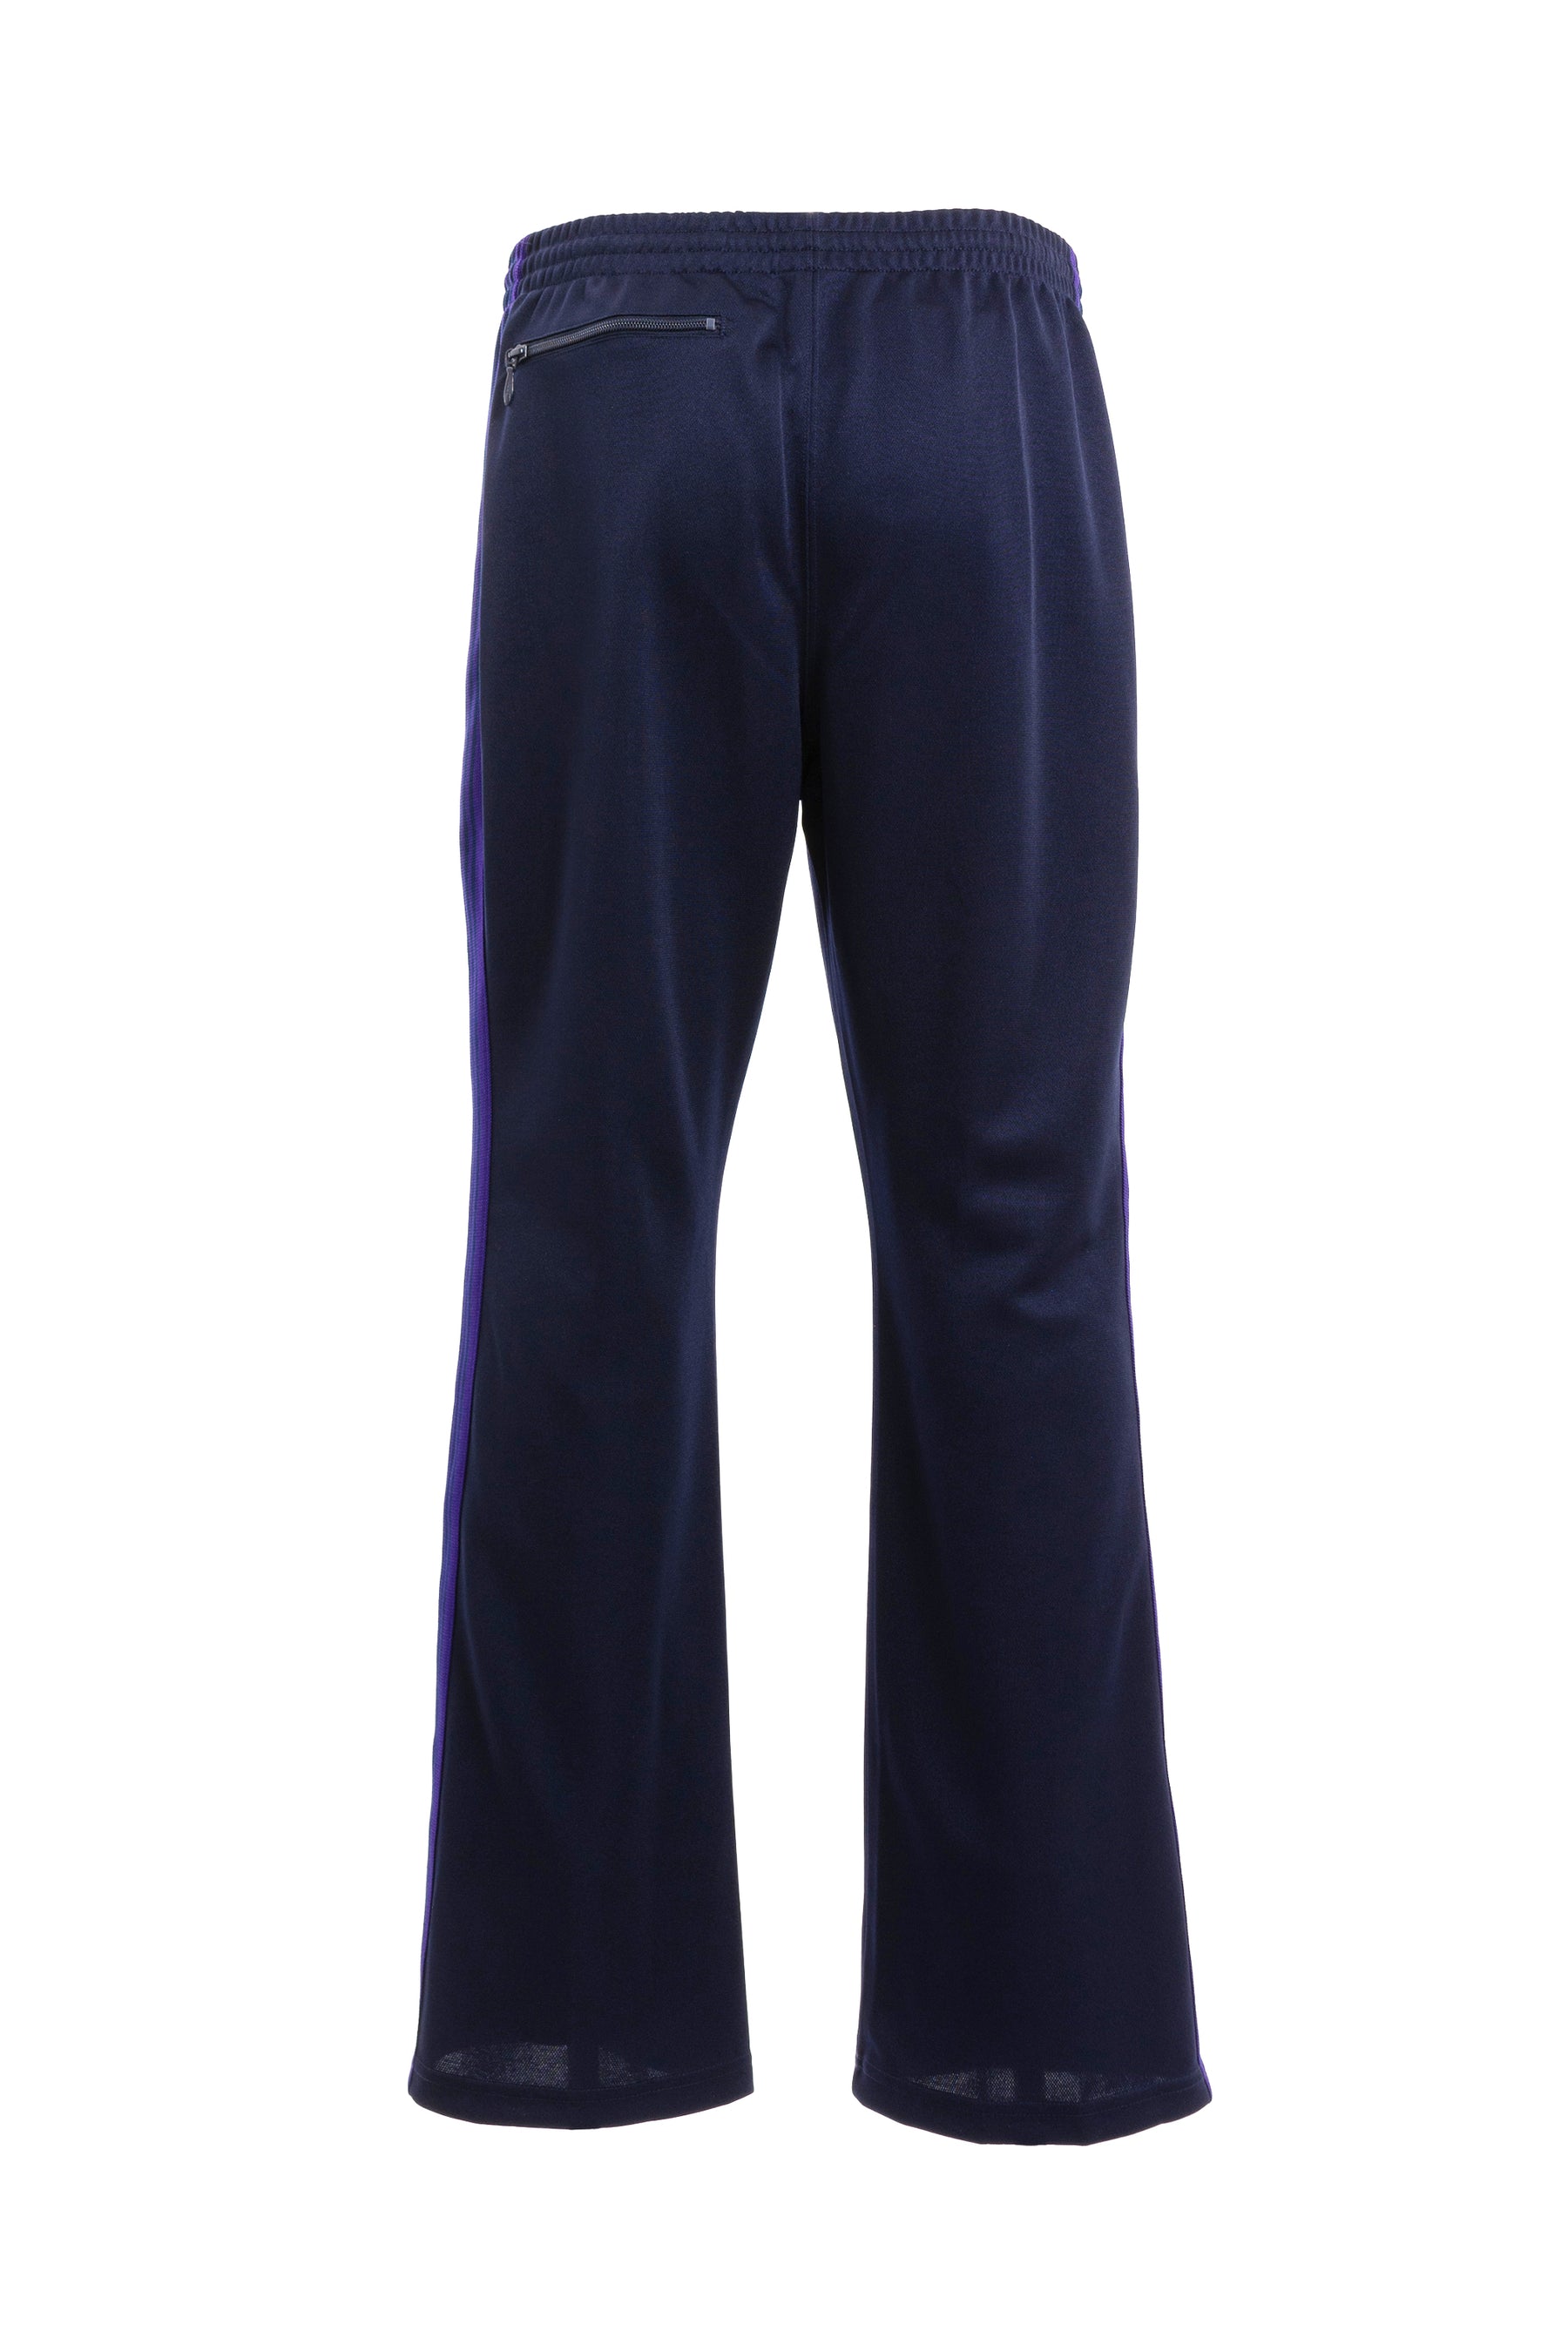 BOOT-CUT TRACK PANT - POLY SMOOTH / NVY